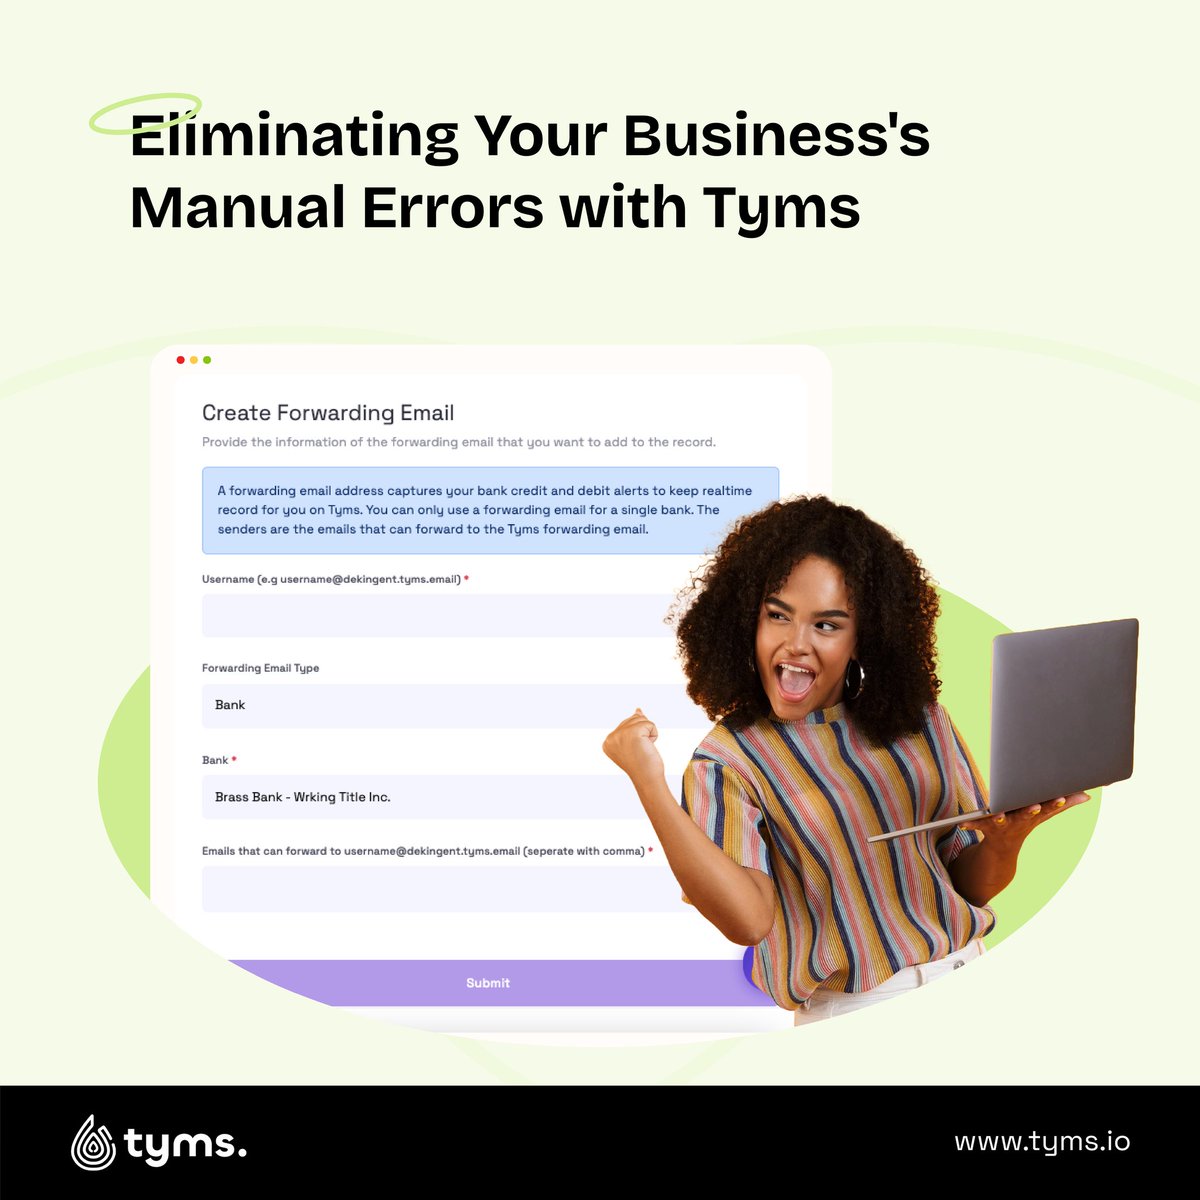 Tired of manual record keeping? Tyms forwarding email syncs with your bank for real-time financial record keeping. It's time for a change! #FinancialAccuracy #Tyms